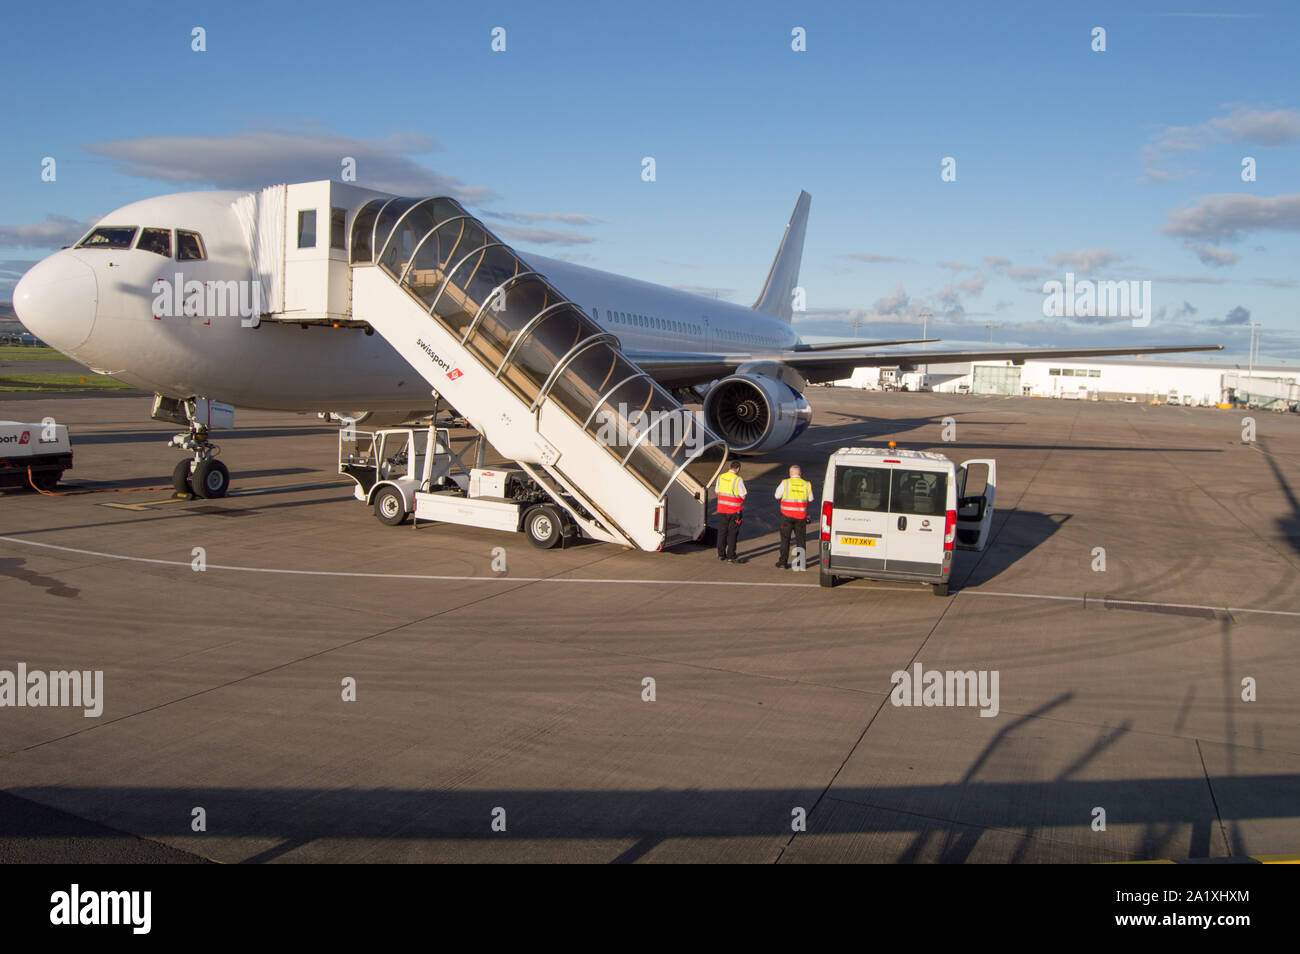 Glasgow, UK. 28 September 2019.  Pictured: Eastern Boeing 767-300 the tarmac after just landing. Following the immediate fallout from the collapsed tour company Thomas Cook, Operation Matterhorn is still in full swing at Glasgow Airport. The grounded and impounded Thomas Cook aircraft have been moved to a quieter part of the airfield to make way for the wide body fleet needed for operation Matterhorn. Colin Fisher/CDFIMAGES.COM Stock Photo